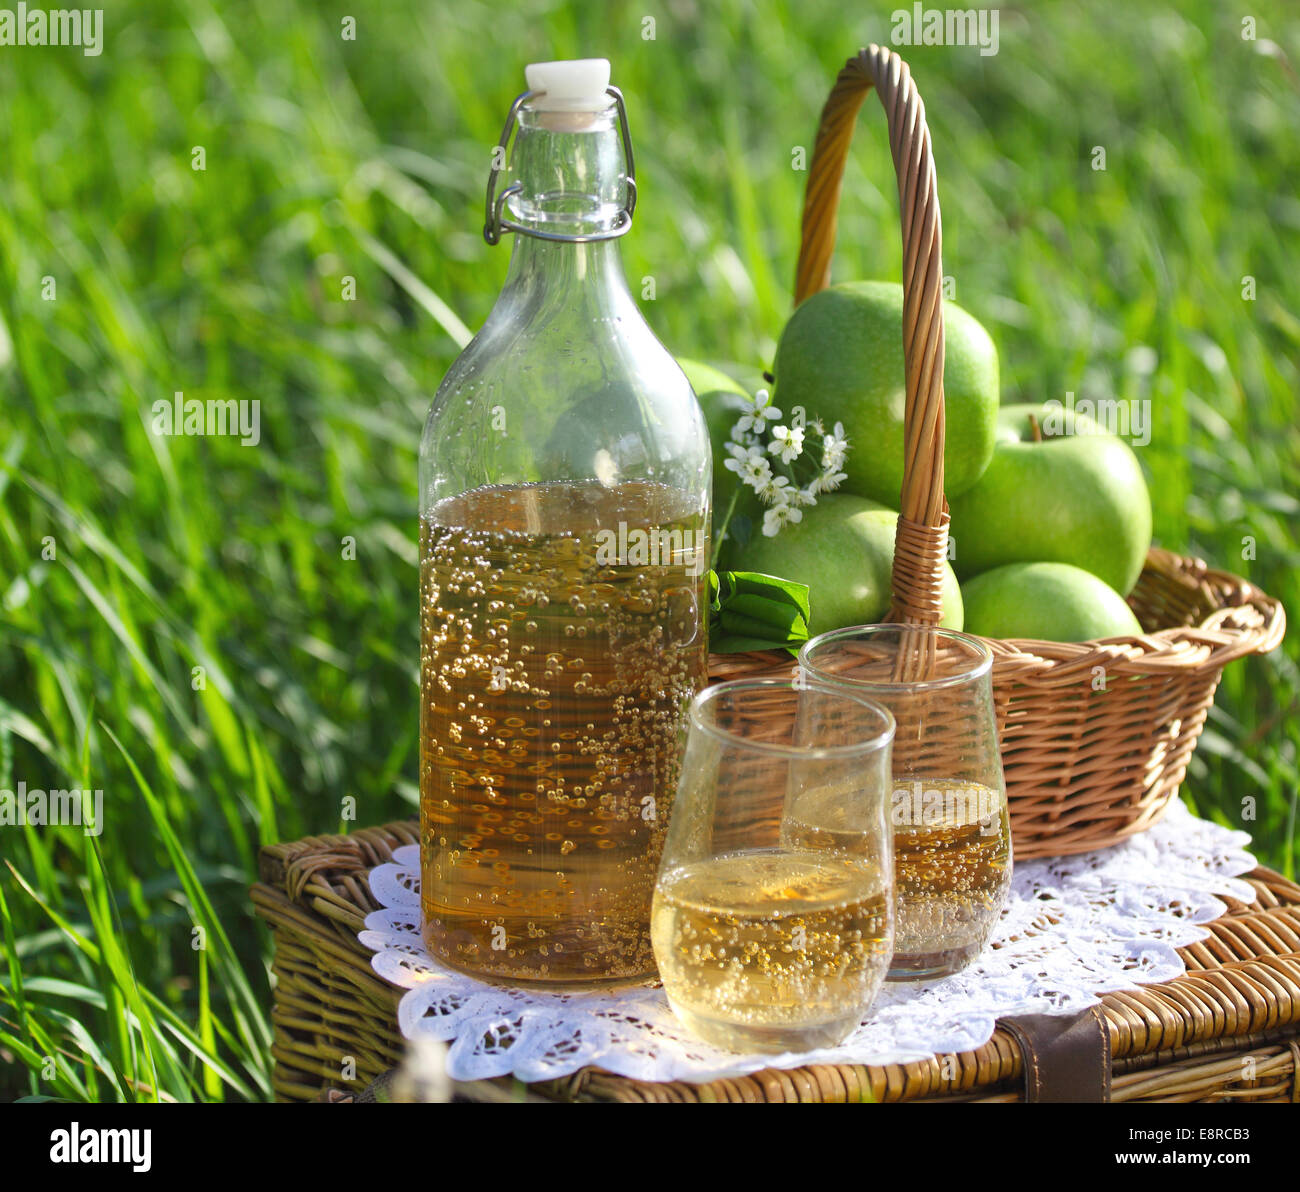 Apple drink and basket with green apples outdoors Stock Photo